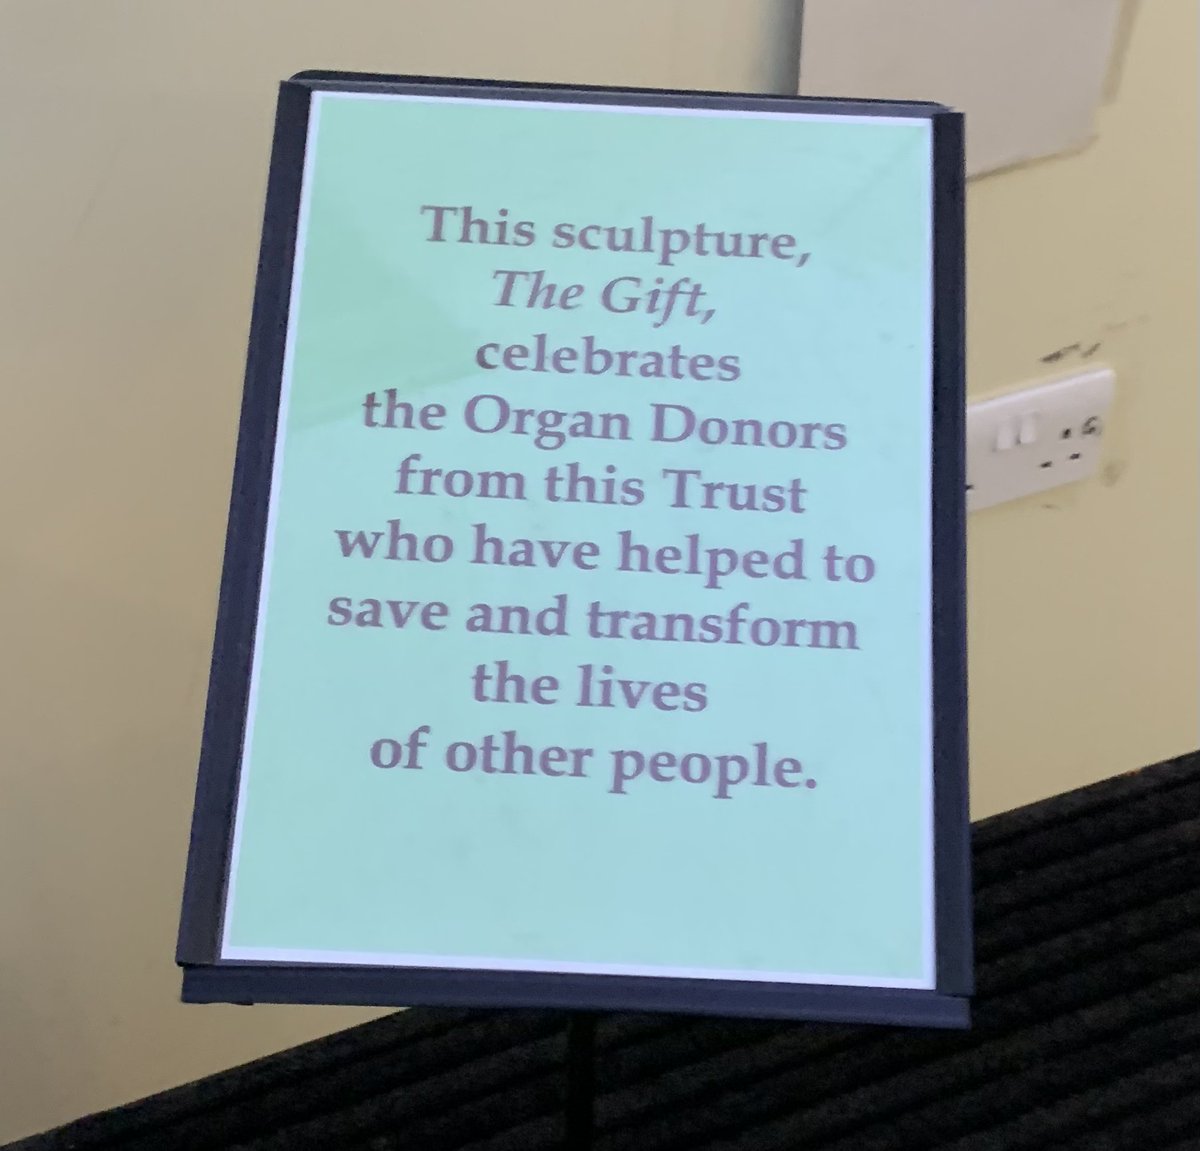 I've walked passed this sculpture in St Richard's Hospital in Chichester so many times recently, albeit for a different reason, but it's sentiment remains so powerful to us. To quote Phillip Larkin 'What will survive of us is love.' #kidneydonation